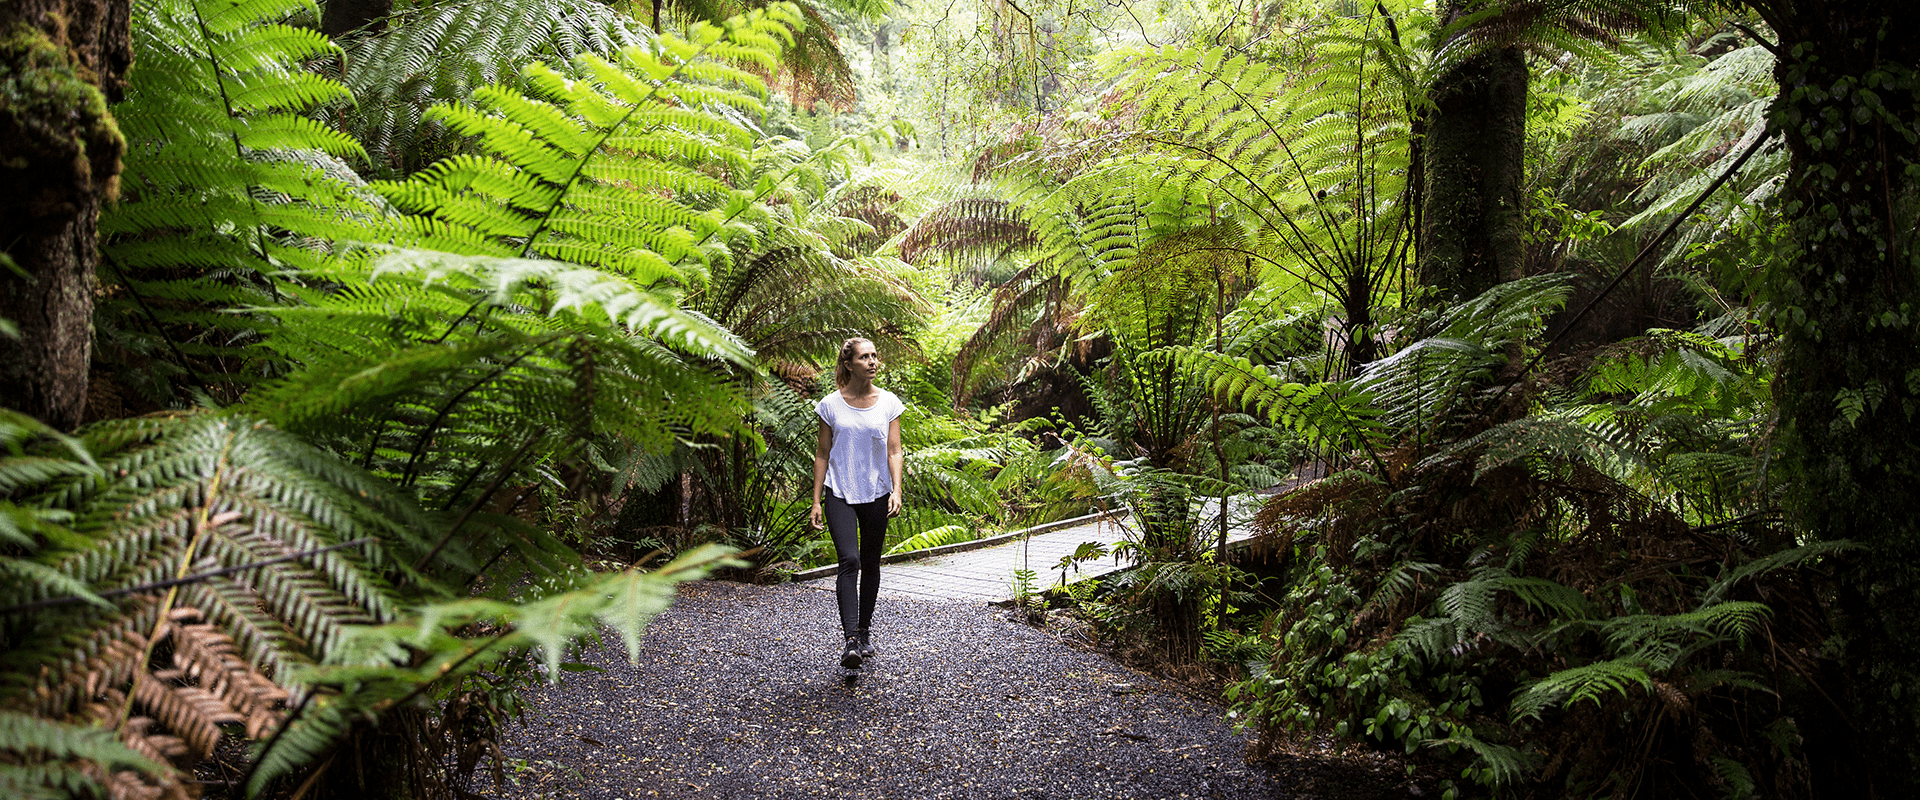 A female walks along a forest path surrounded by large tree ferns and a dense tree canopy.